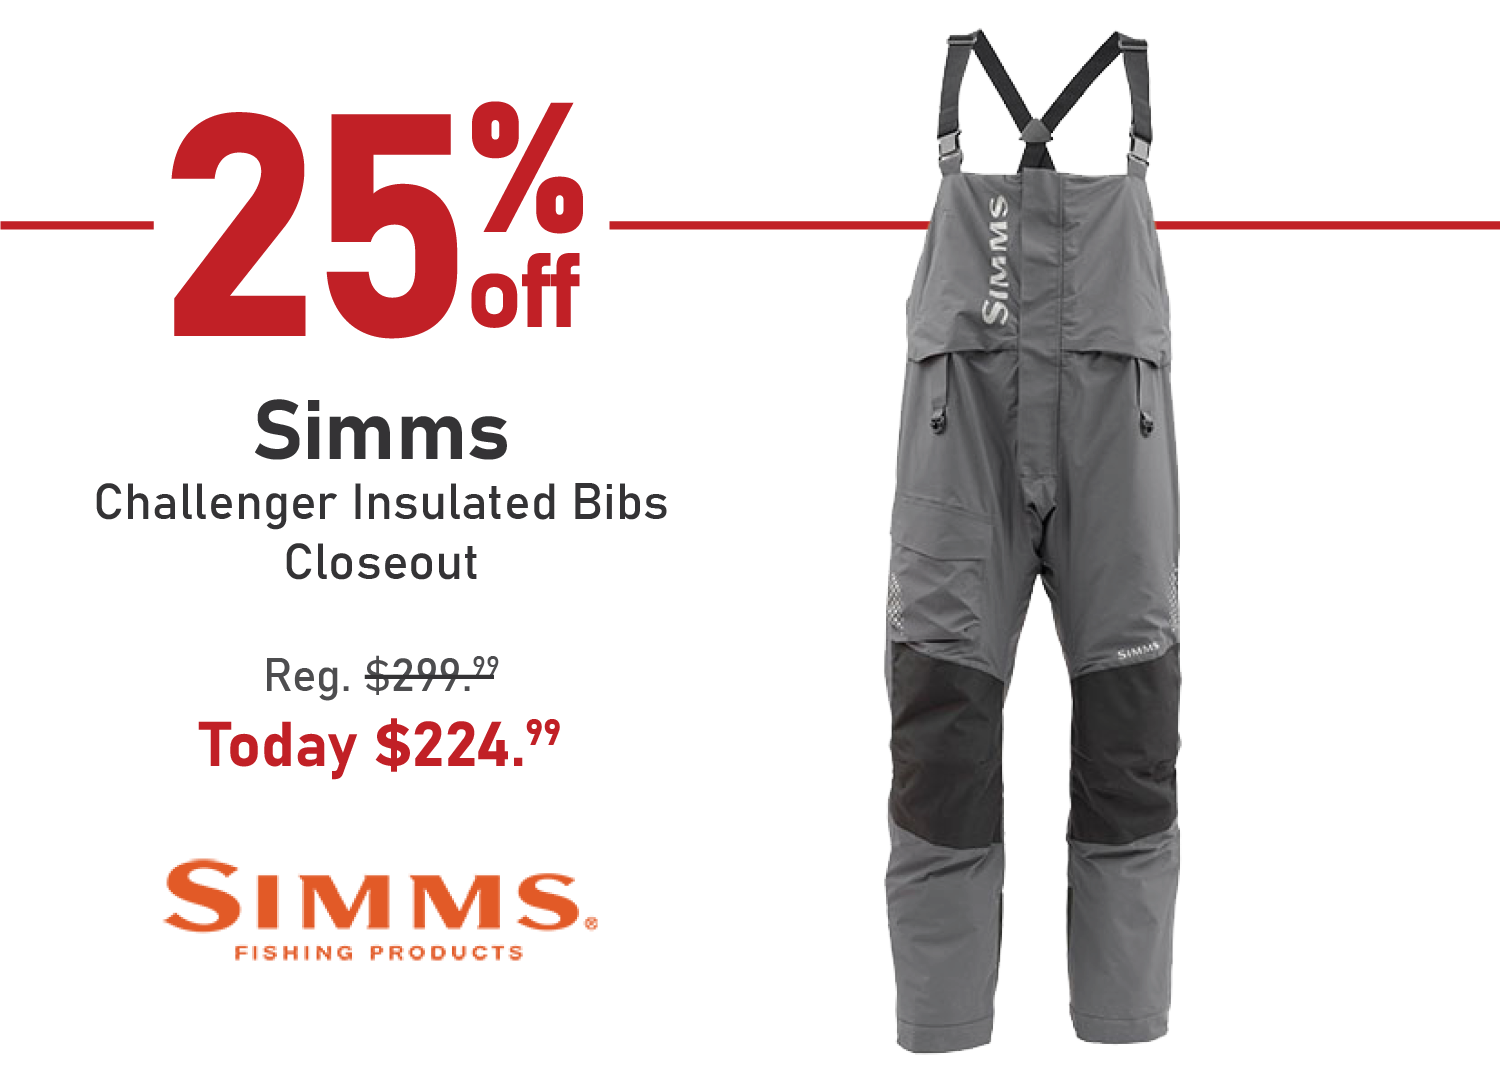 Save 25% on the Simms Challenger Insulated Bibs - Closeout